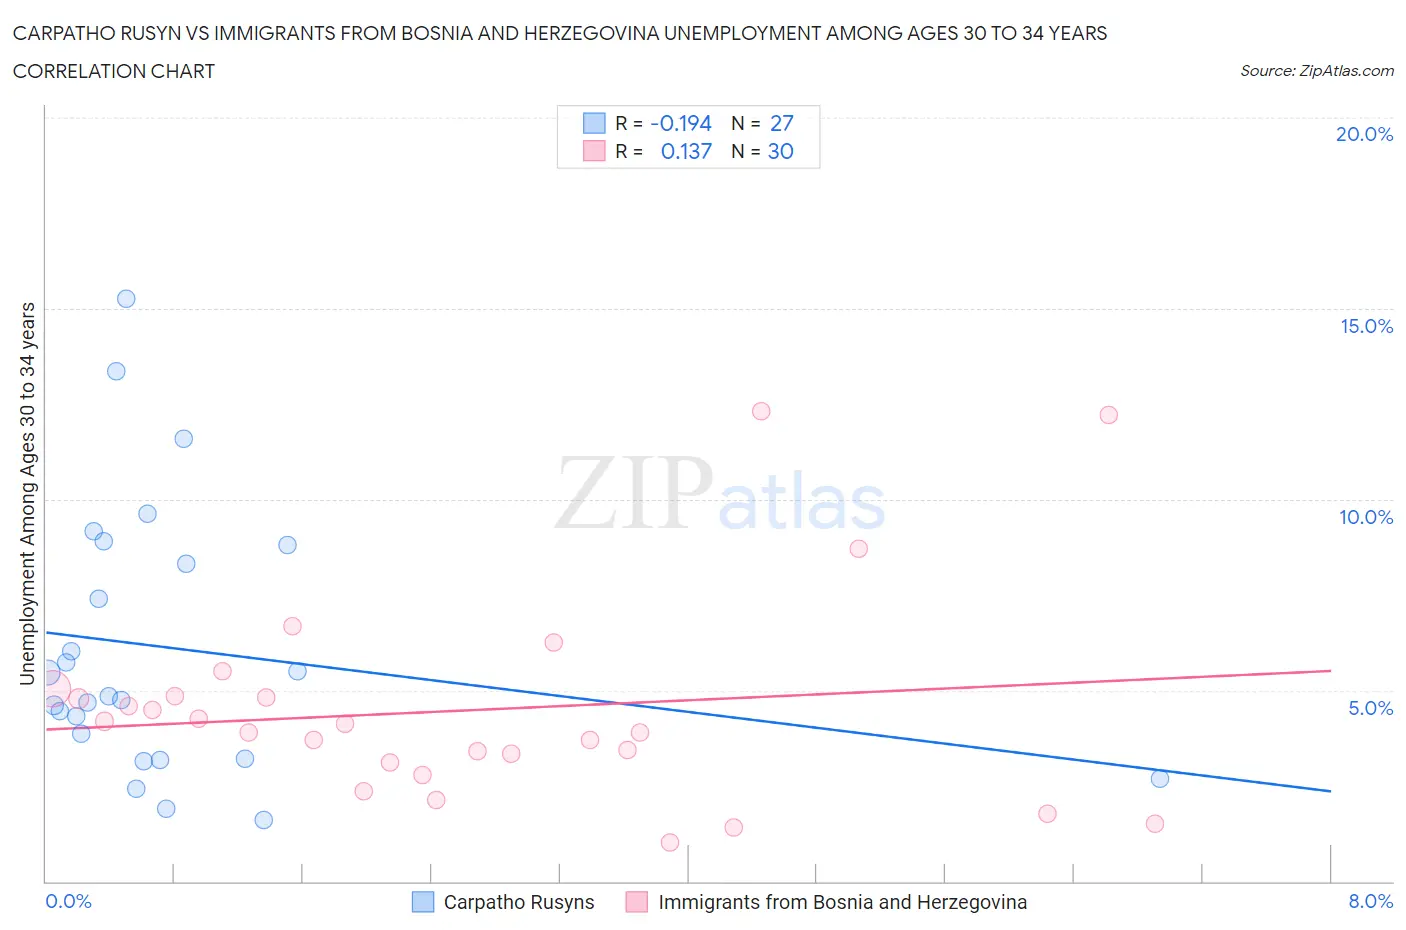 Carpatho Rusyn vs Immigrants from Bosnia and Herzegovina Unemployment Among Ages 30 to 34 years